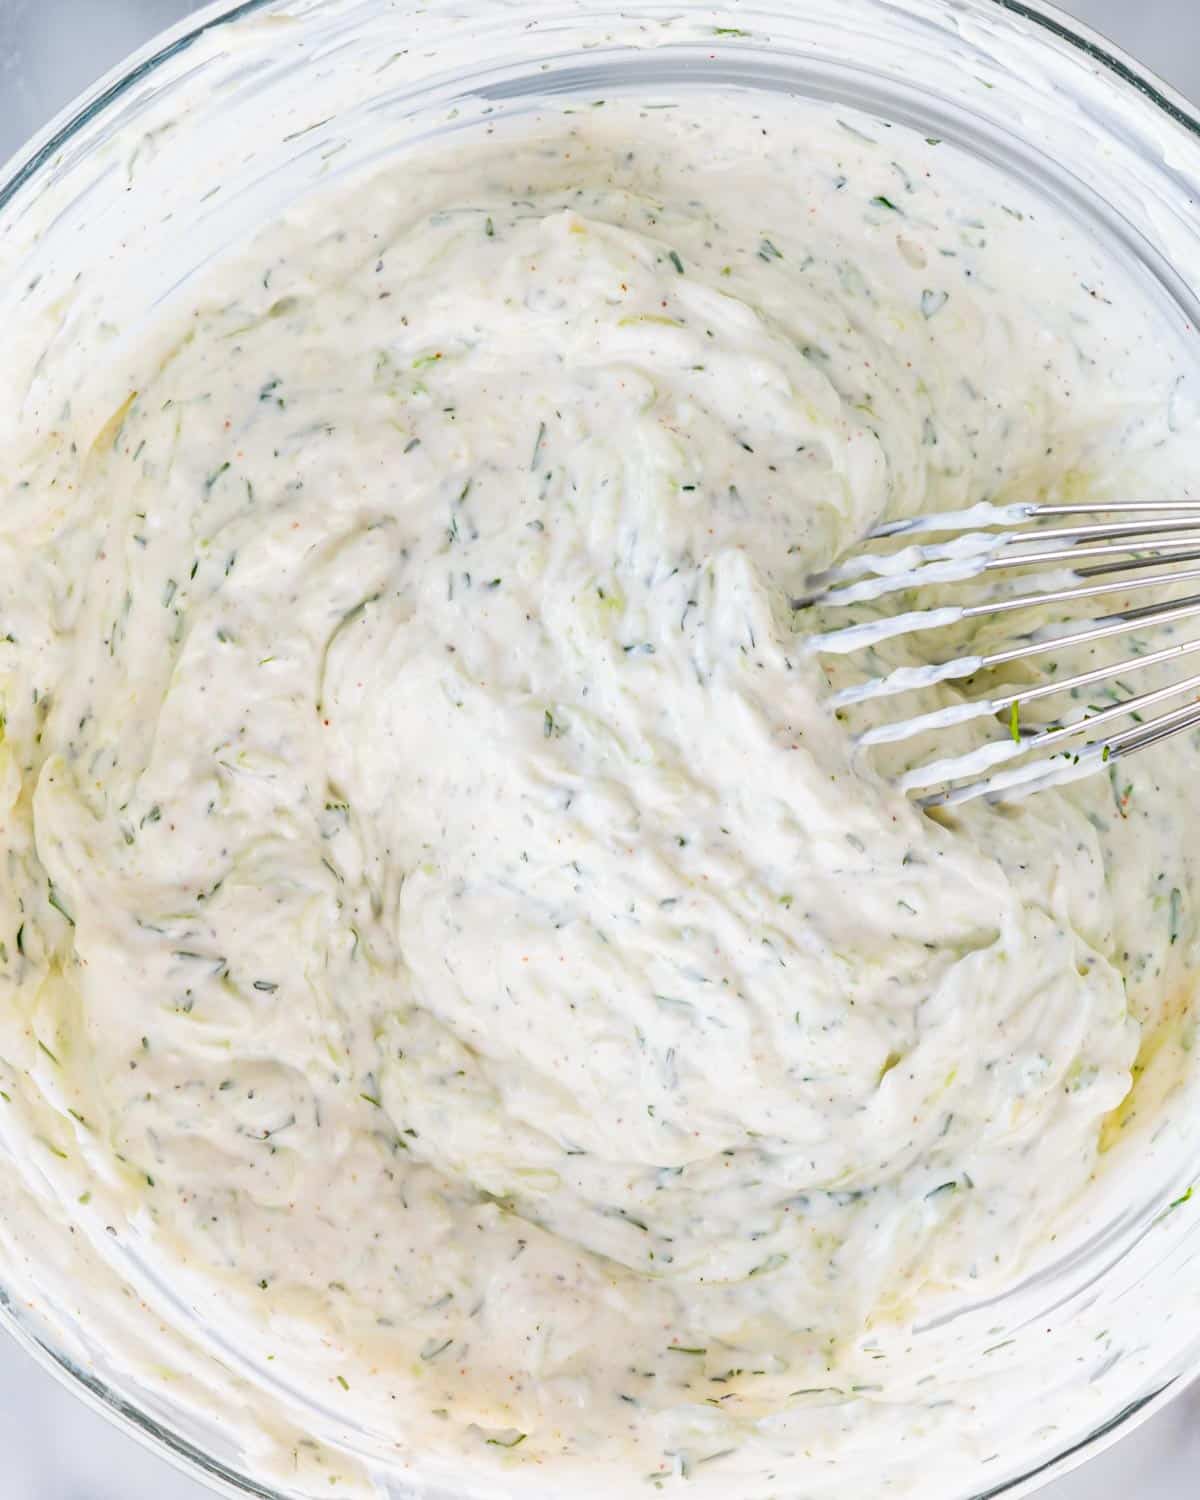 freshly made tzatziki sauce in a bowl.